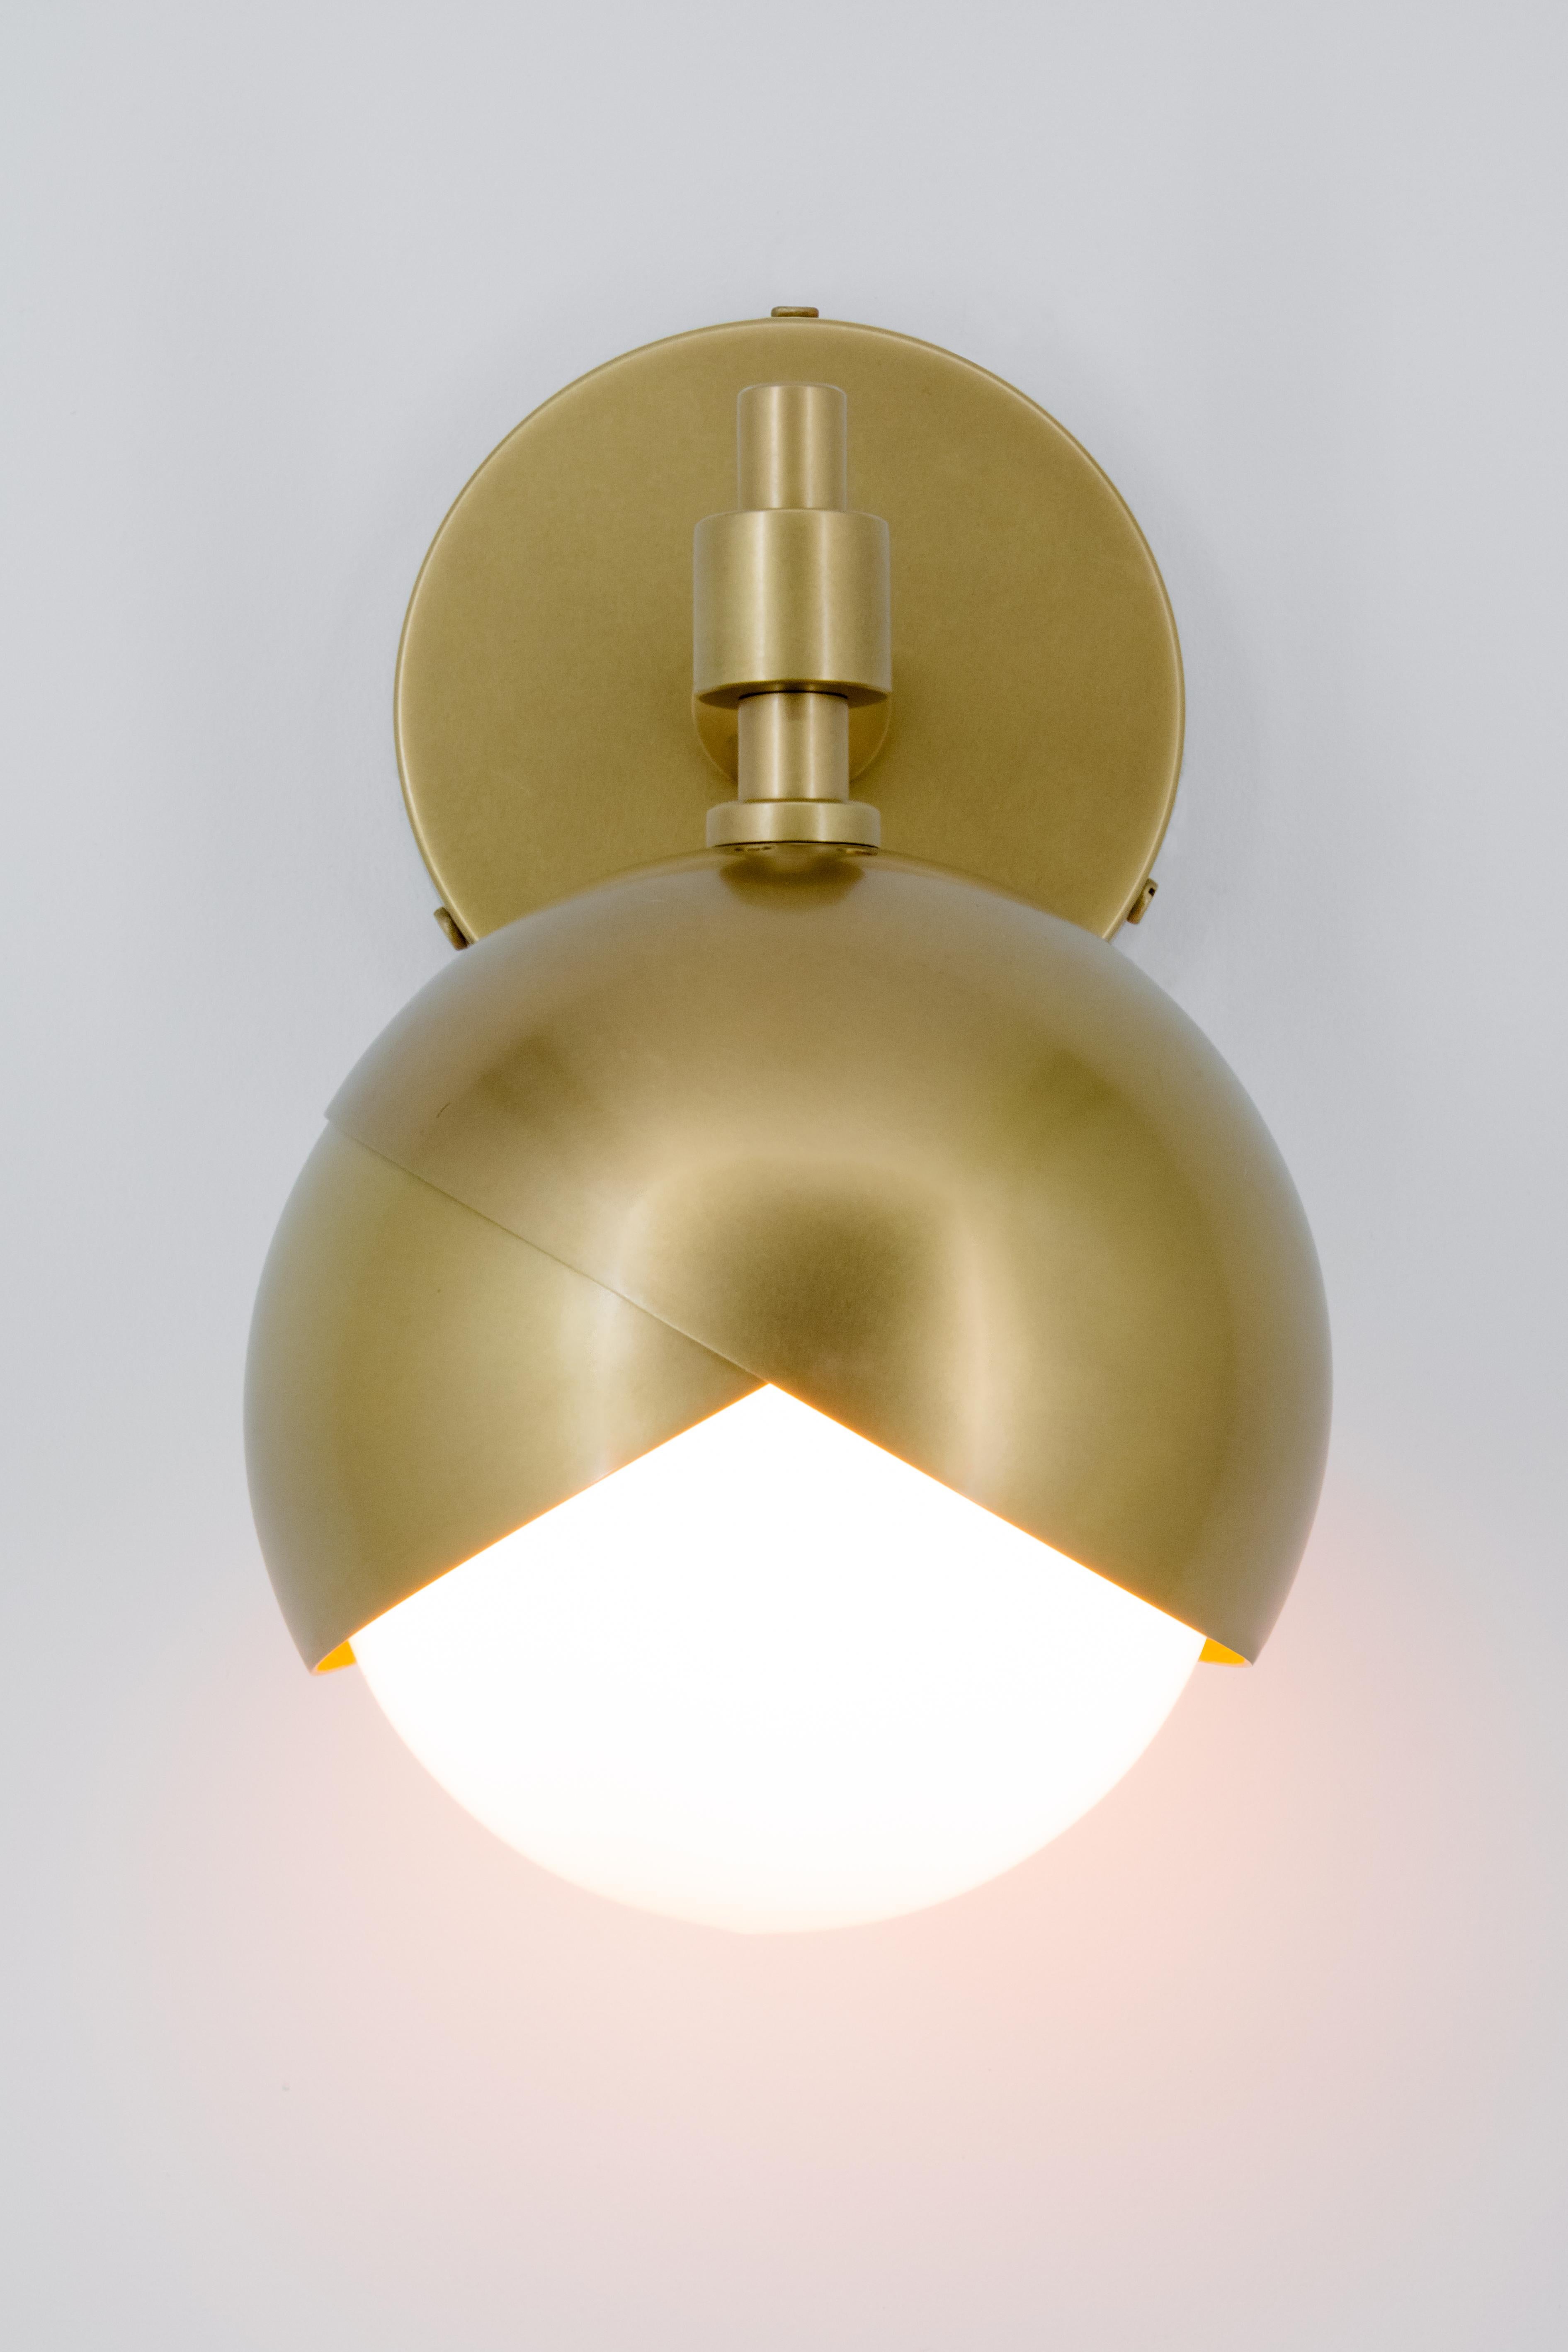 Other Benedict Simple Sconce in Adobe Powder Coat and Satin Brass For Sale